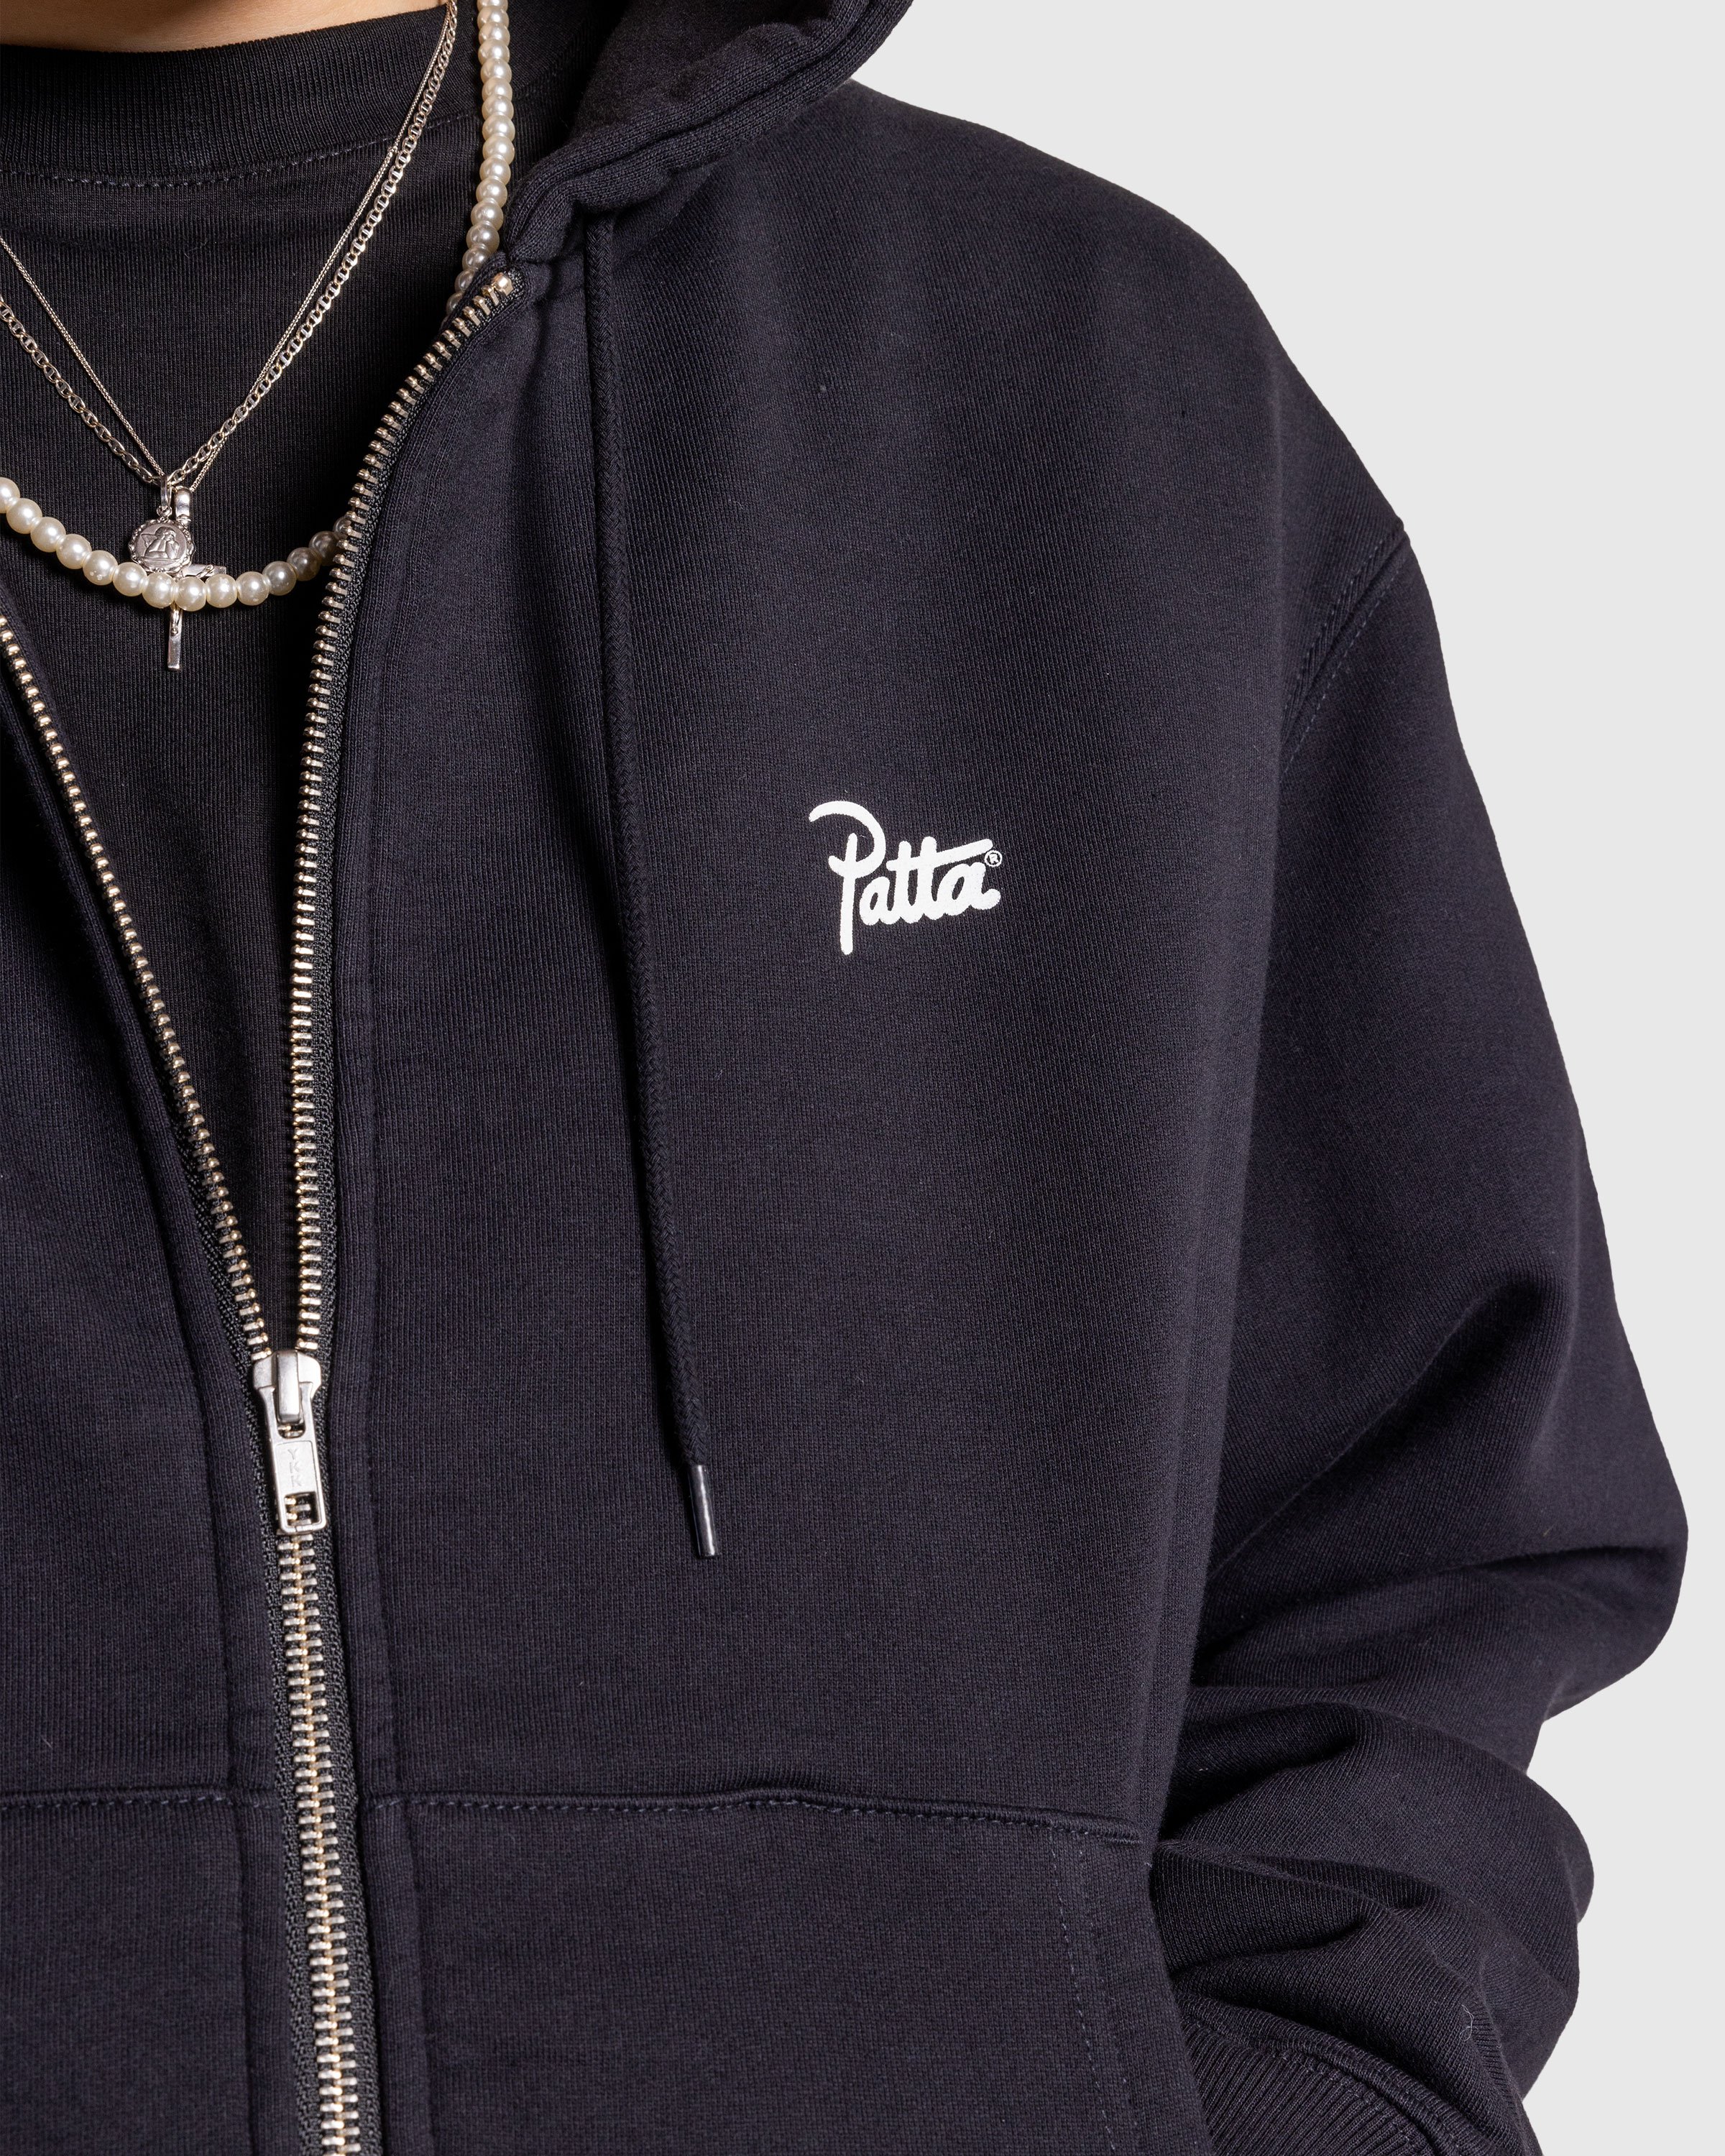 Patta - Classic Zip Up Hooded Sweater Black - Clothing - Black - Image 5